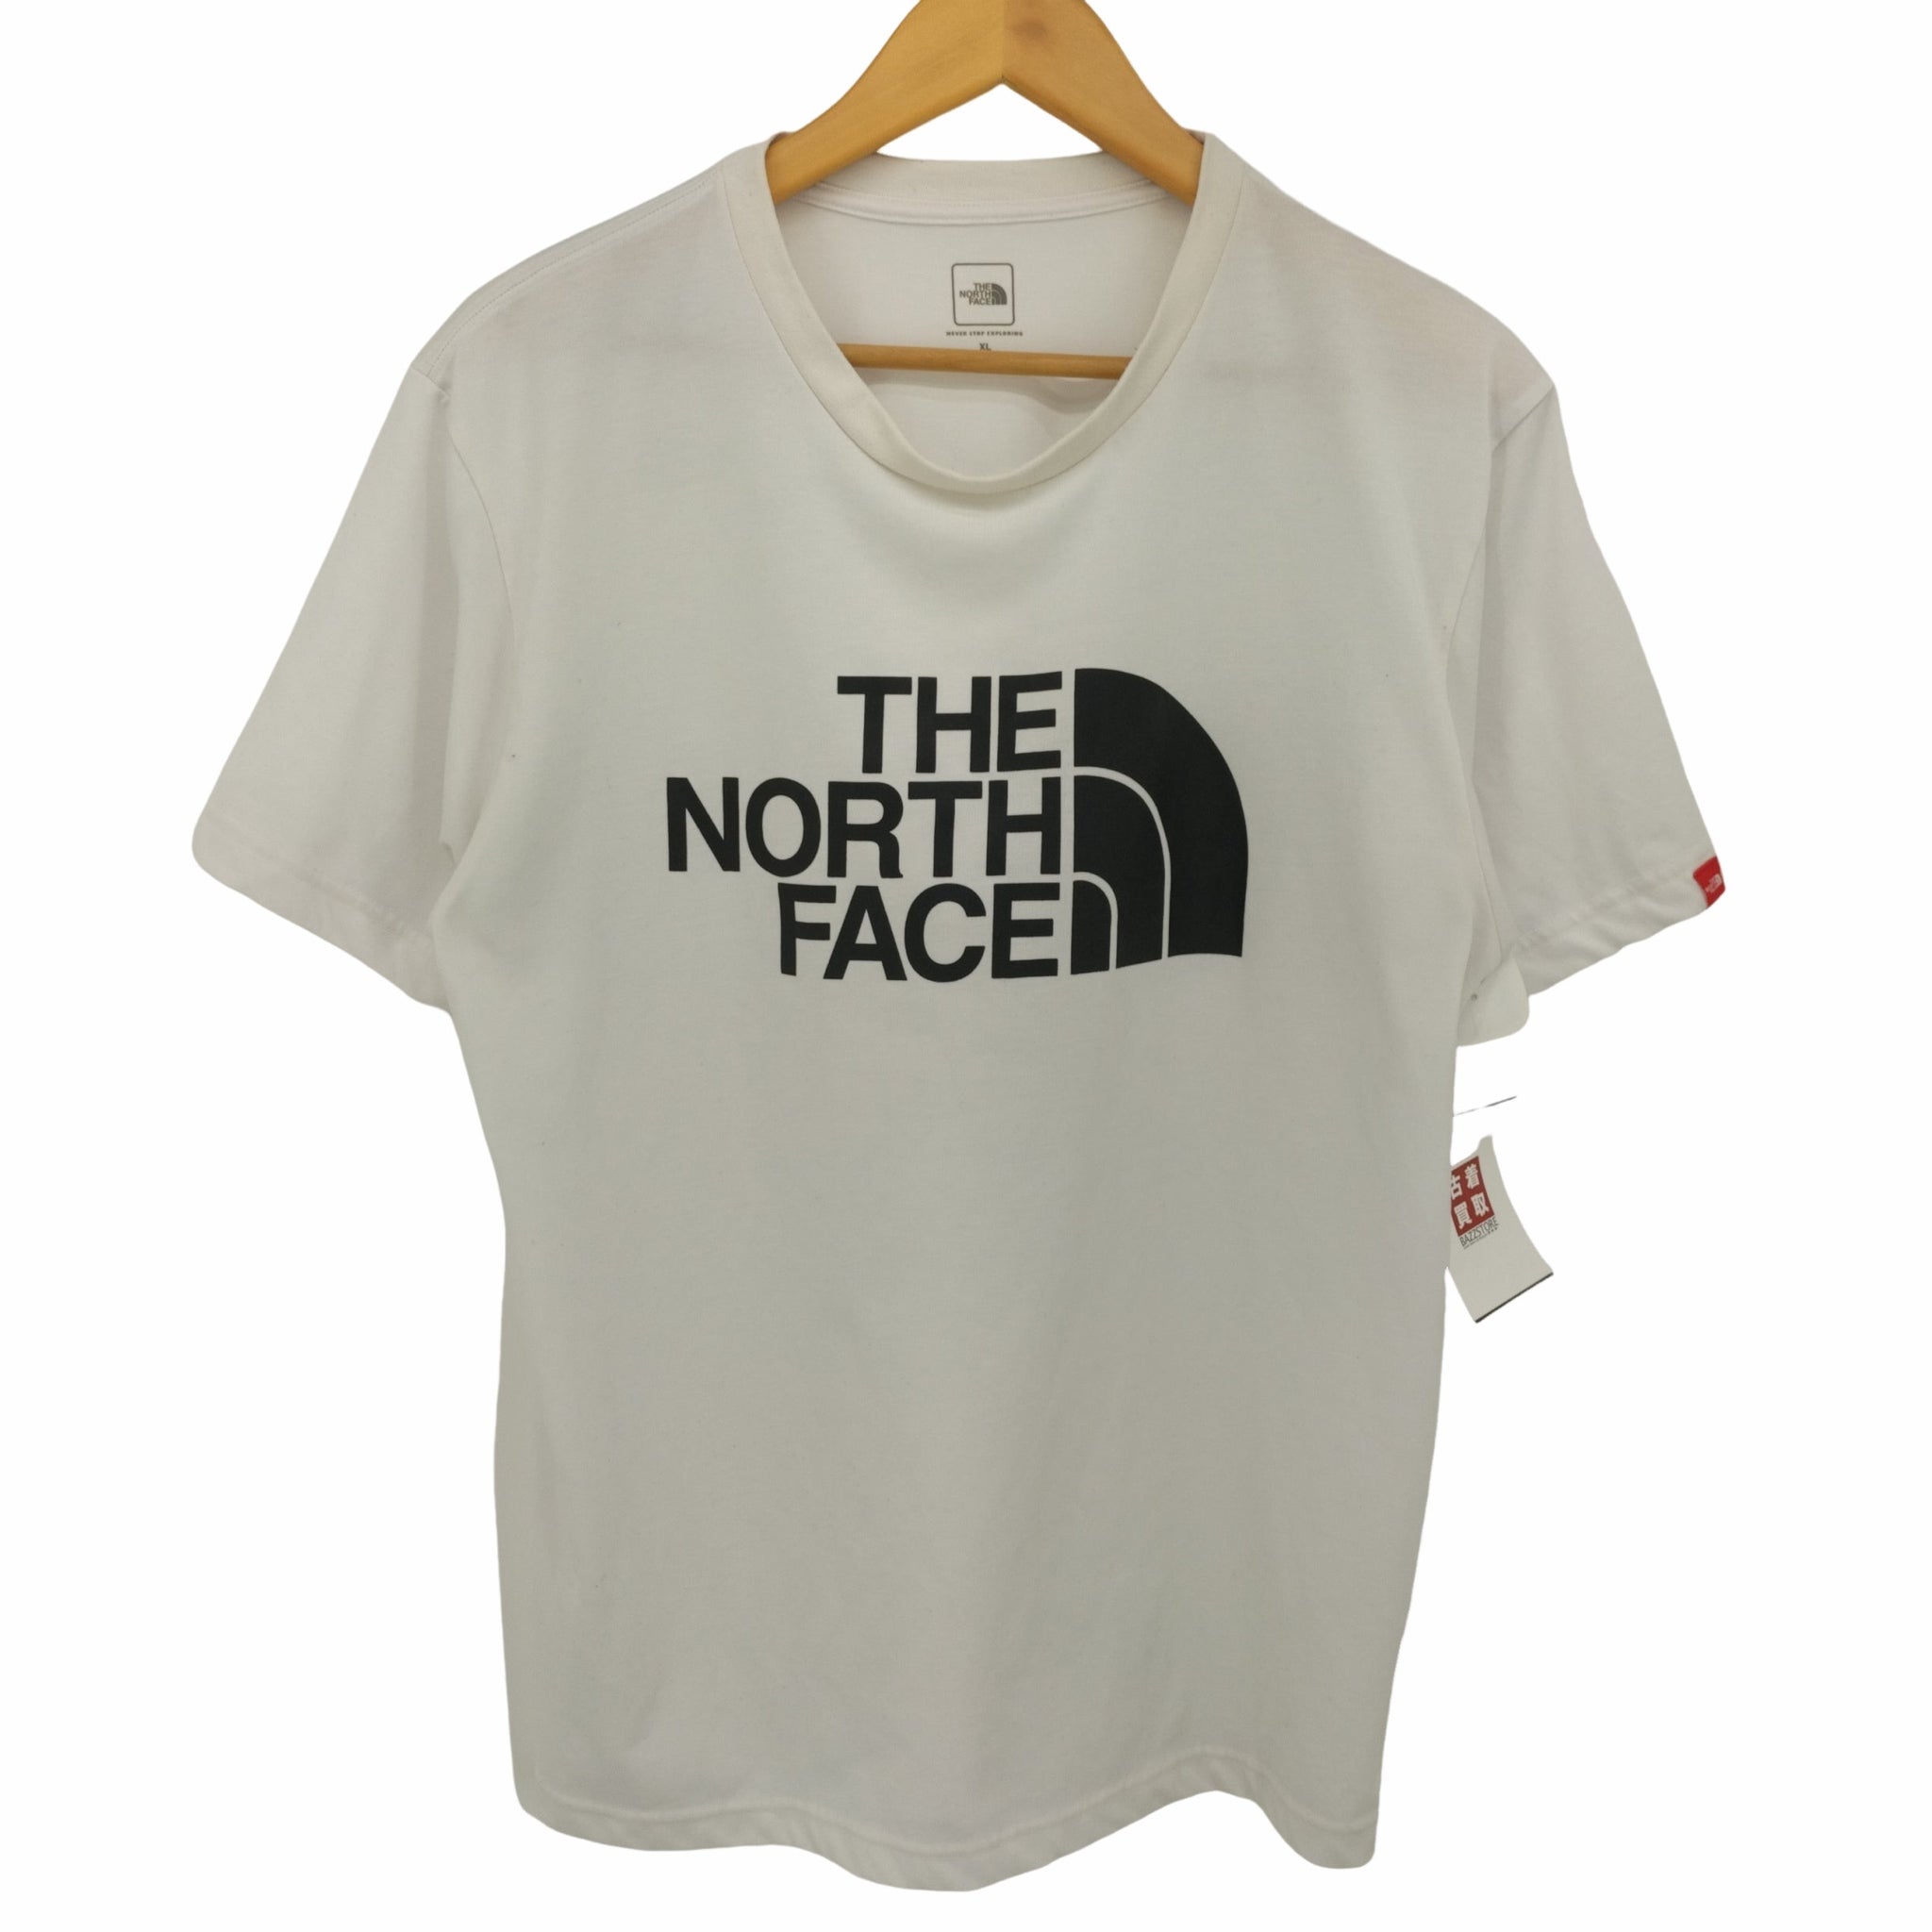 THE NORTH FACE(ザノースフェイス)S/S COLOR DOME TEE ショートスリーブ カラー ドーム ティー